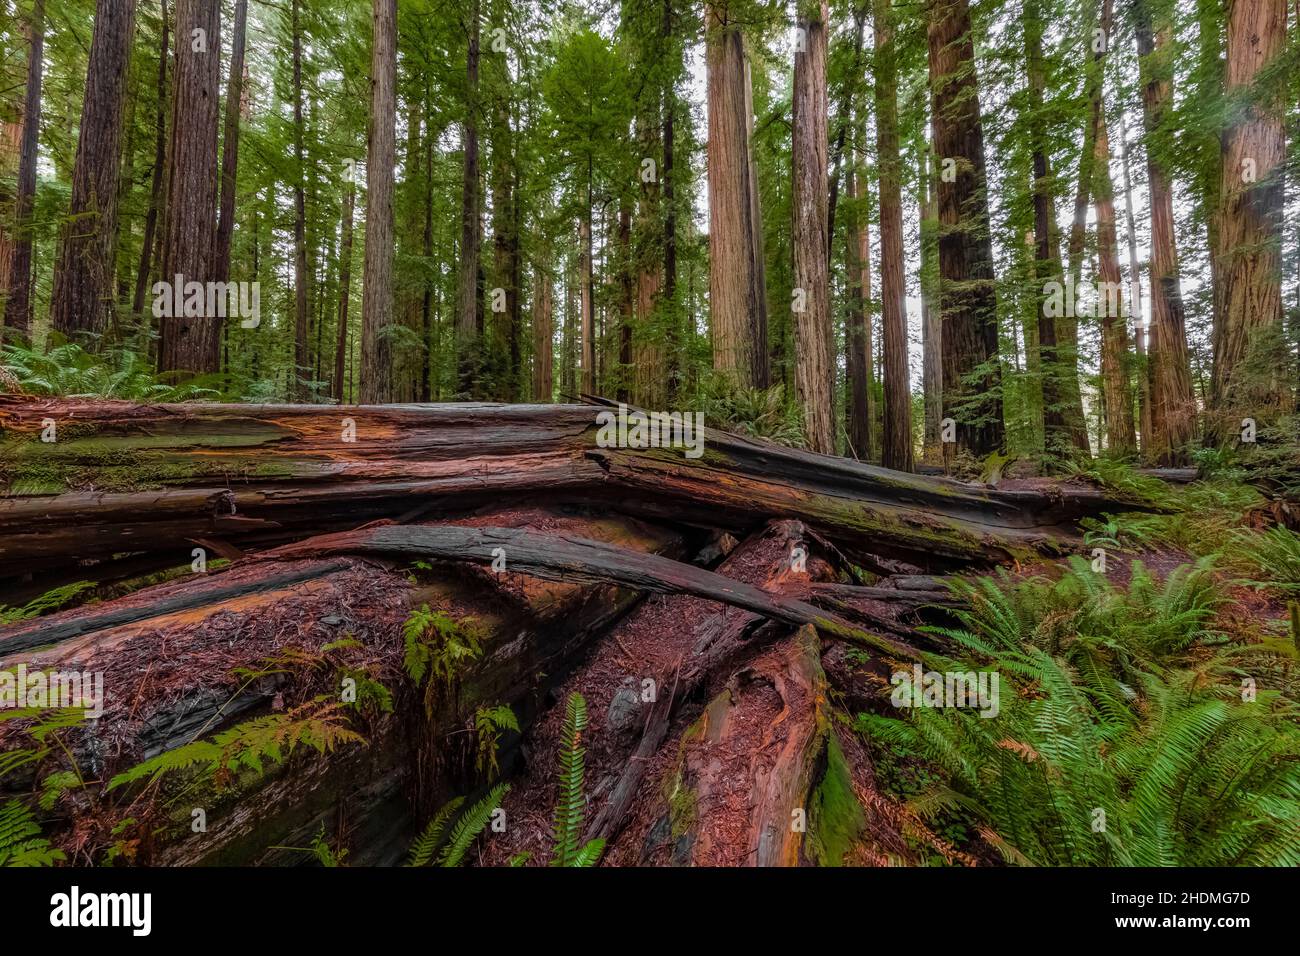 Fallen Coast Redwood Log in Stout Memorial Grove in Jedediah Smith Redwoods state Park in Redwood National and state Parks, California, USA Foto Stock